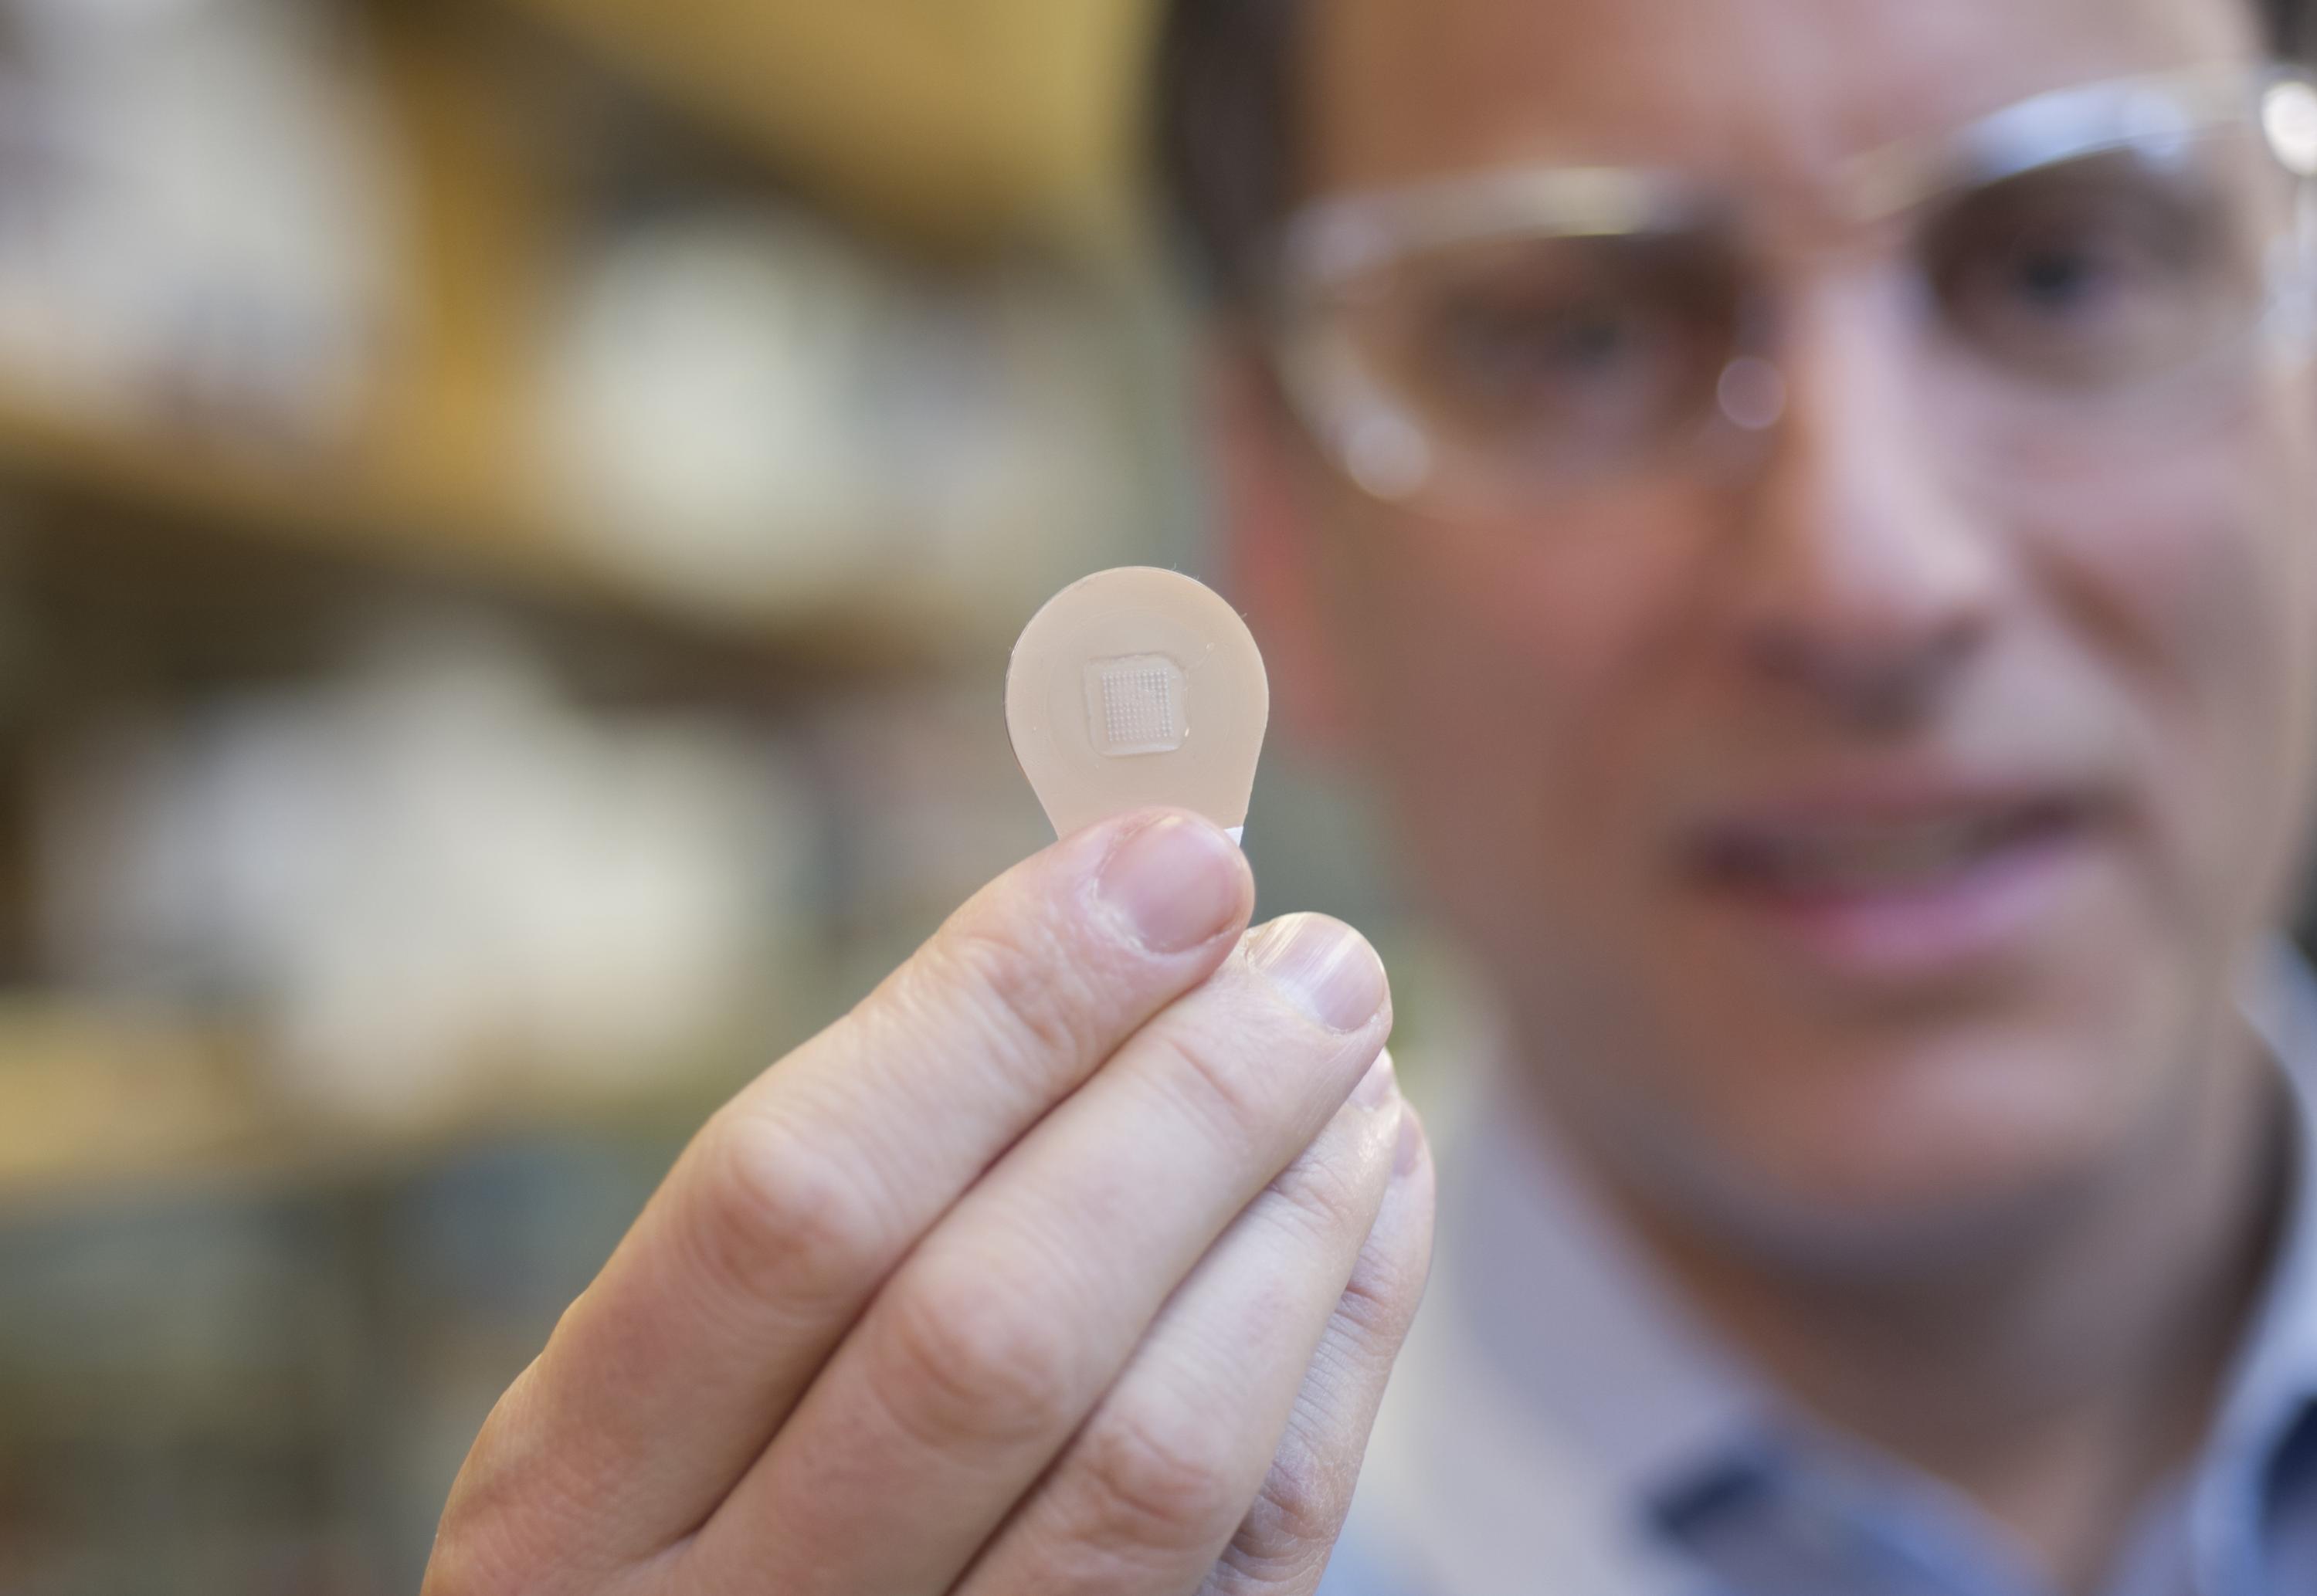 Mark Prausnitz, Ph.D., Georgia Tech Regents professor in the School of Chemical and Biomolecular Engineering, holds a microneedle vaccine patch containing needles that dissolve into the skin. (Credit: Christopher Moore, Georgia Tech)